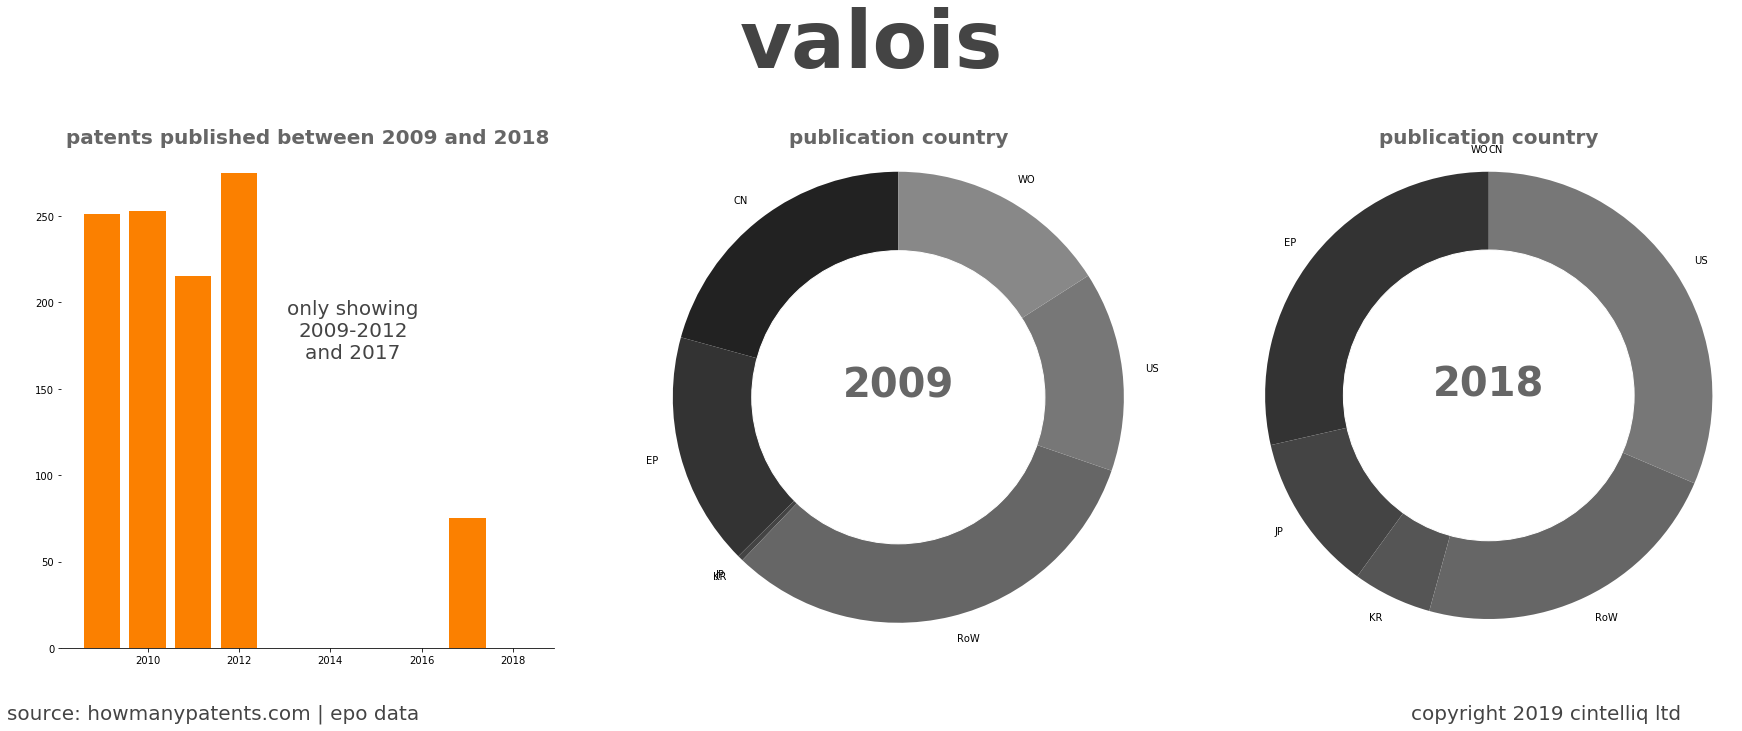 summary of patents for Valois